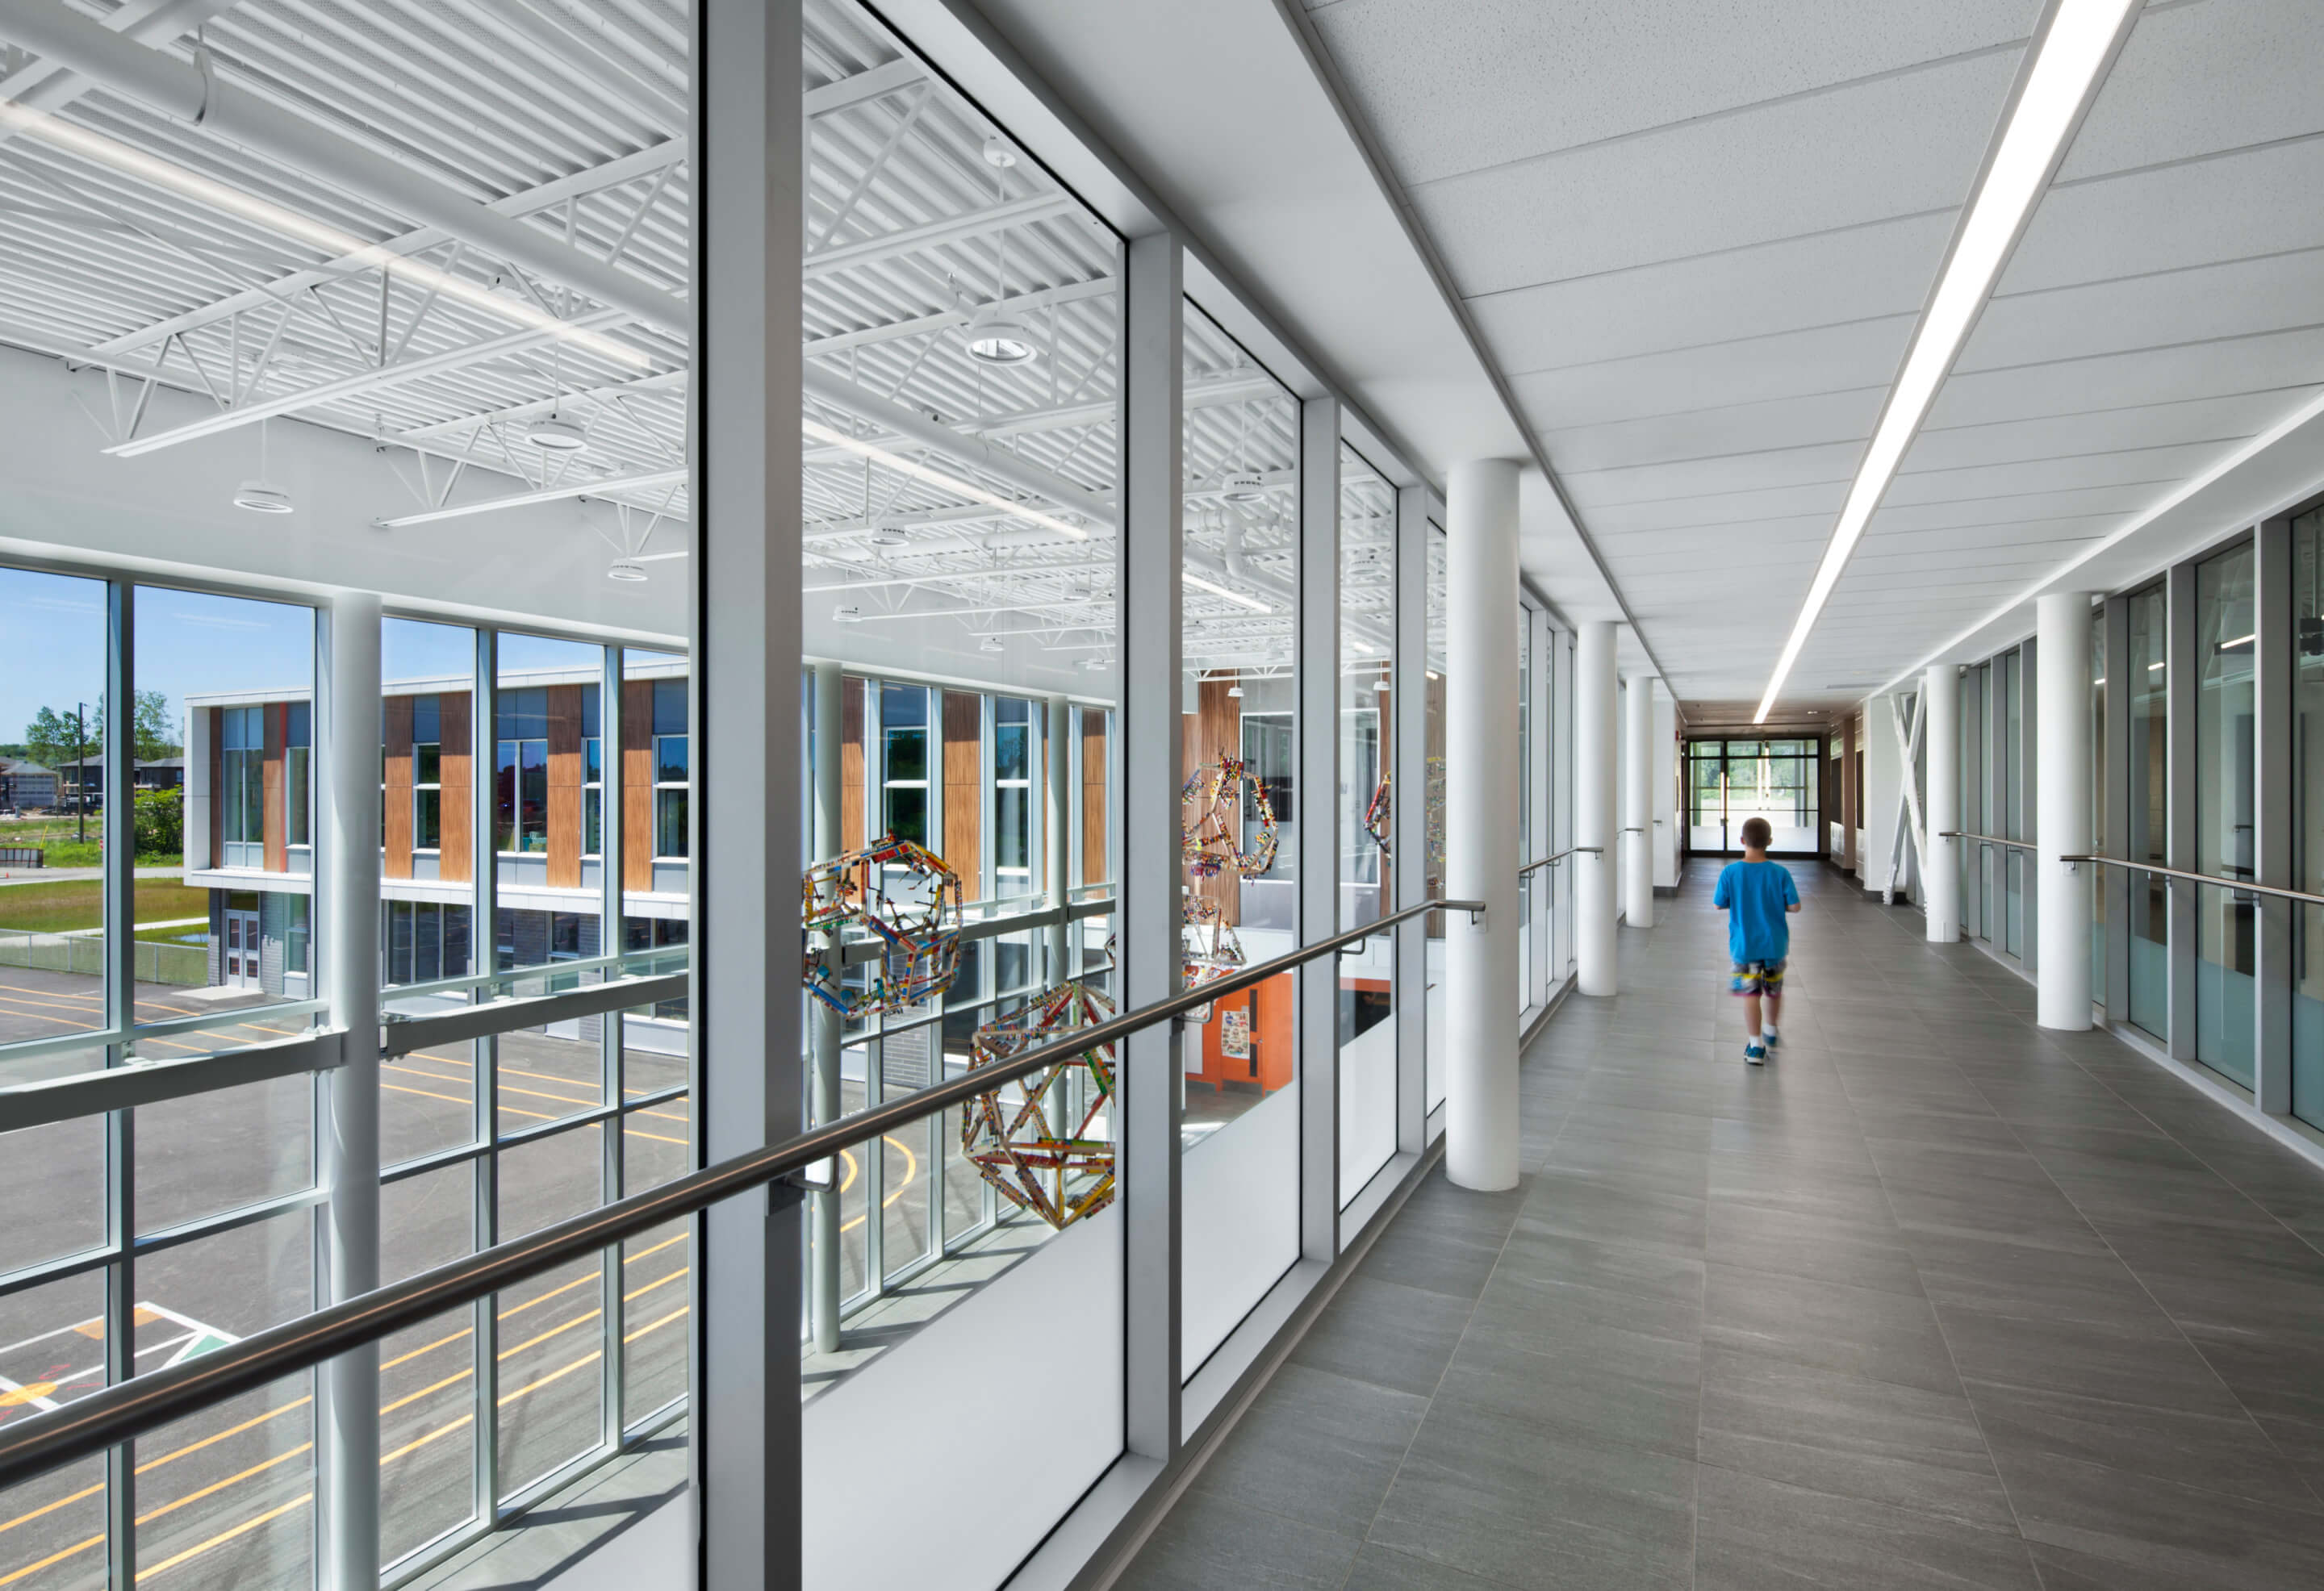 A long strip of light runs along the center of the ceiling of a glassed-in walkway that overlooks a two-story atrium